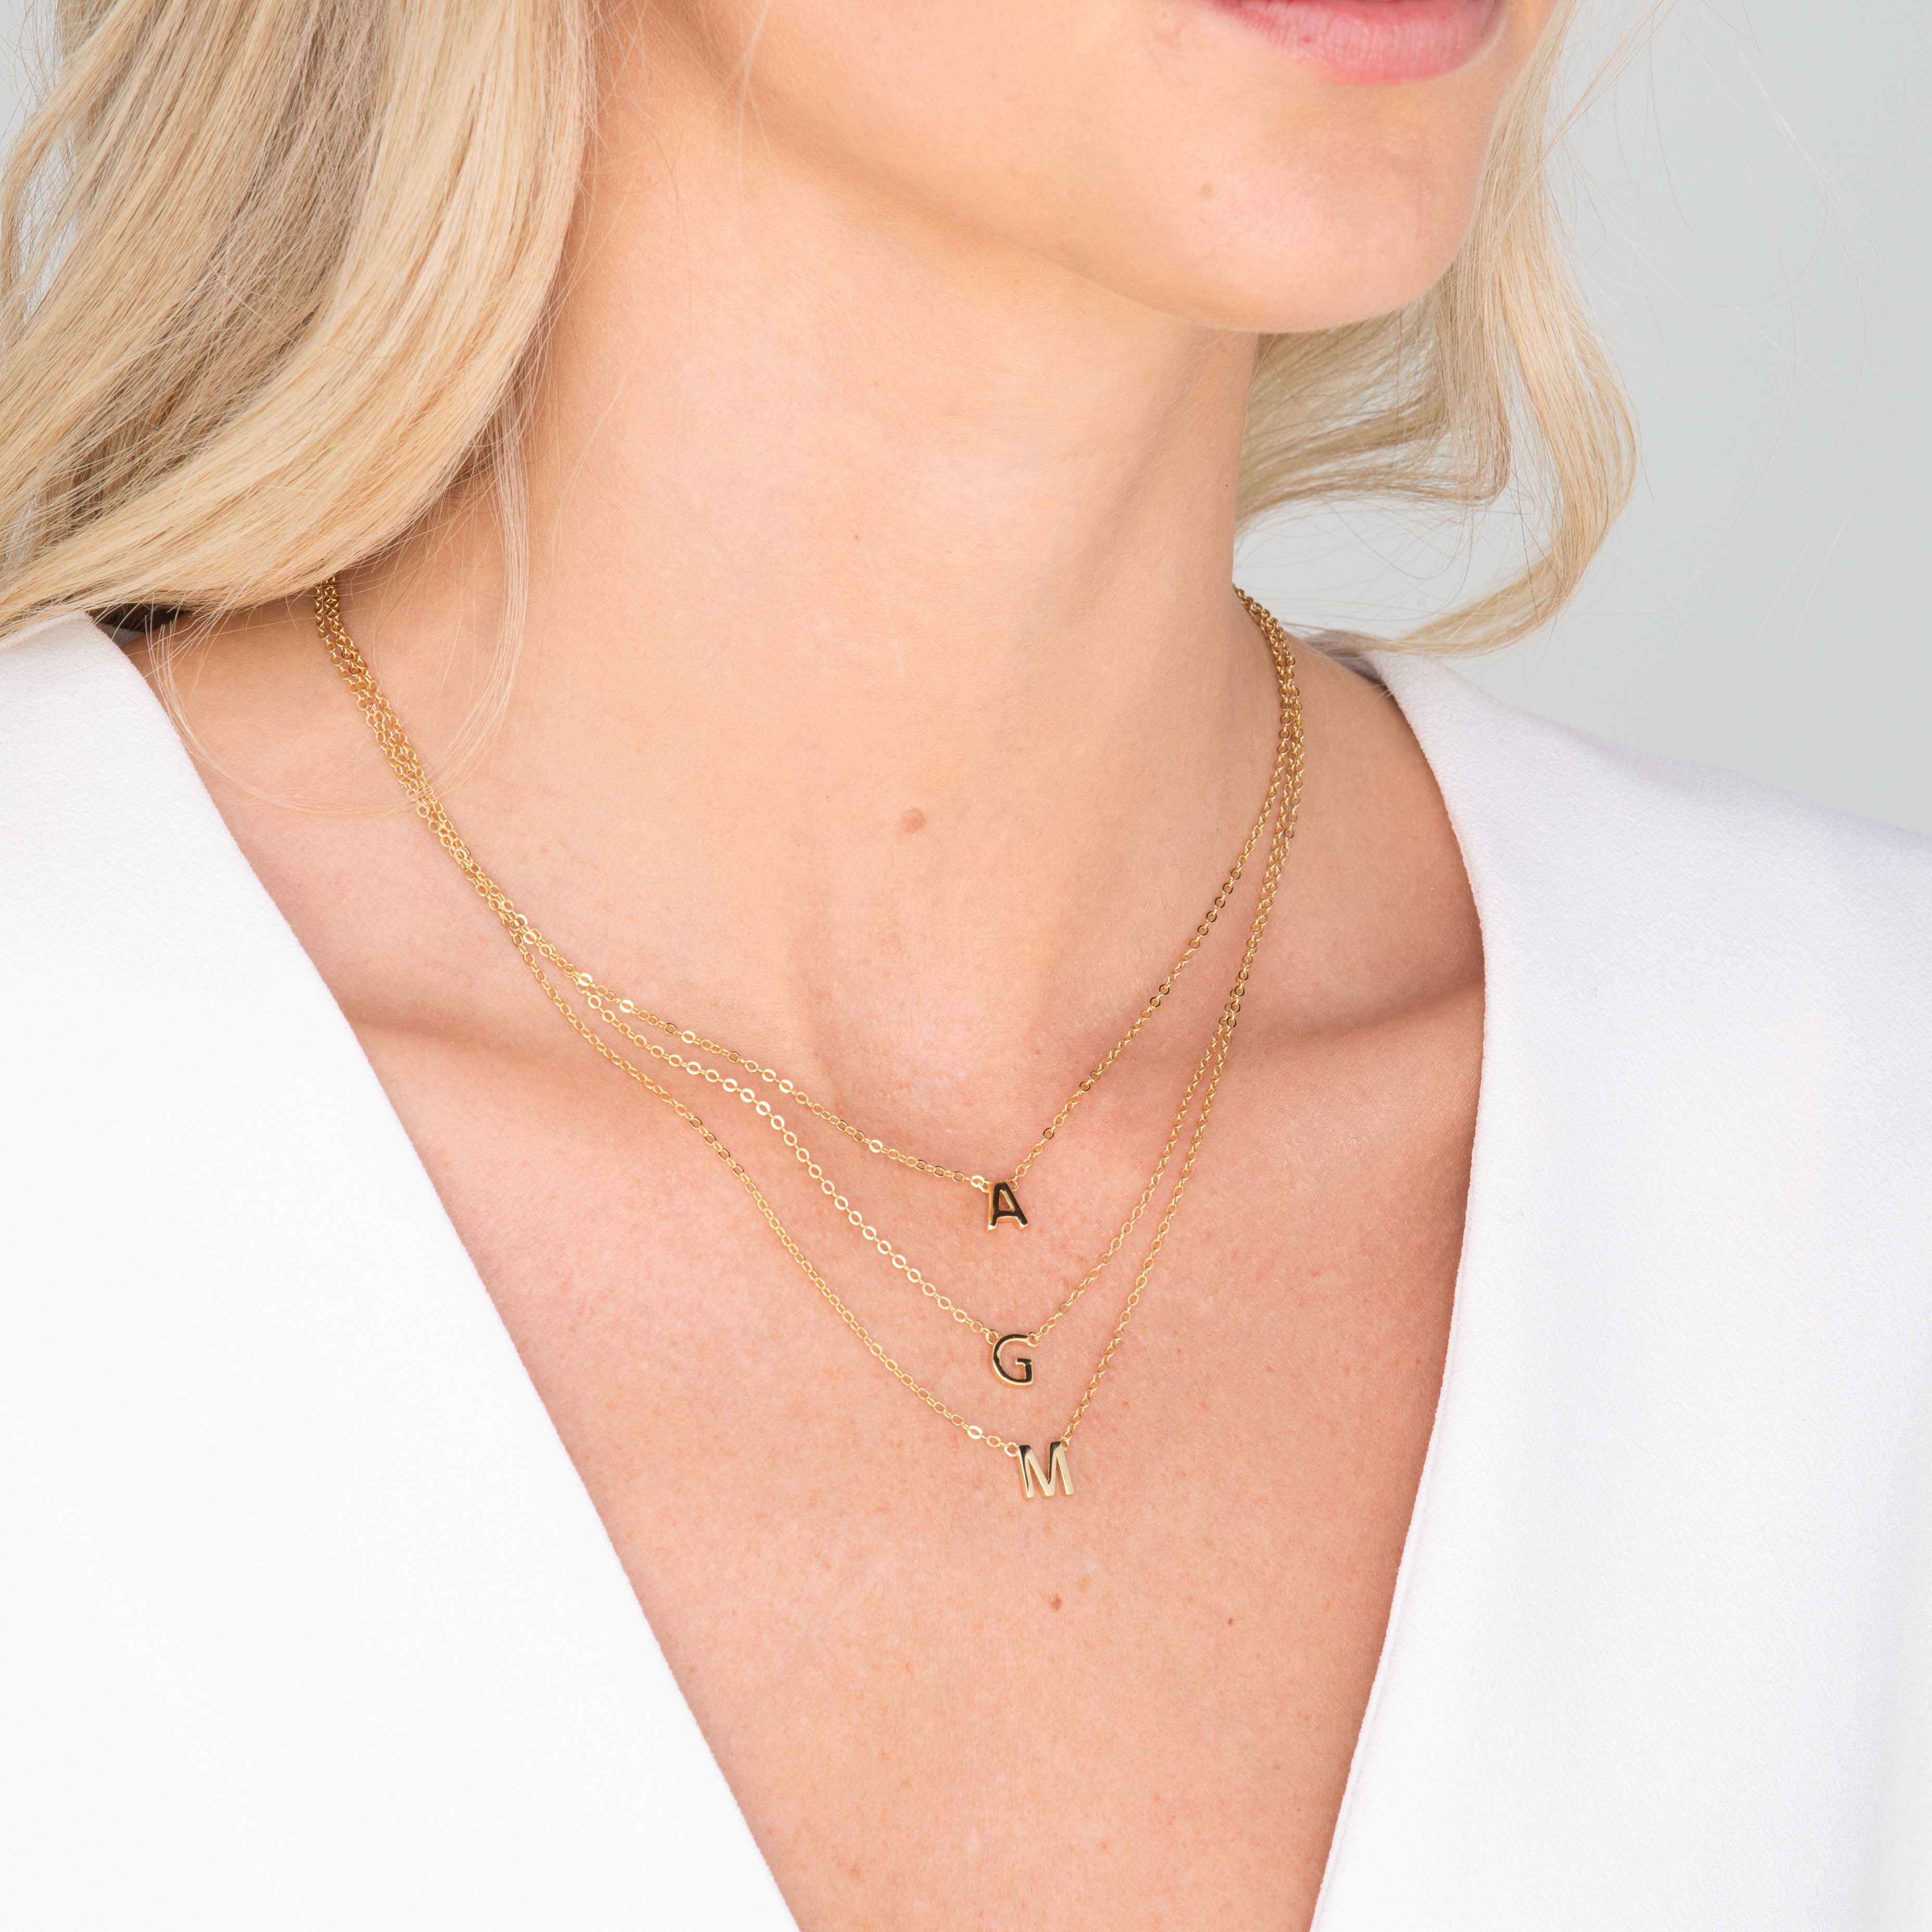 The Original Single Initial Letter Necklace